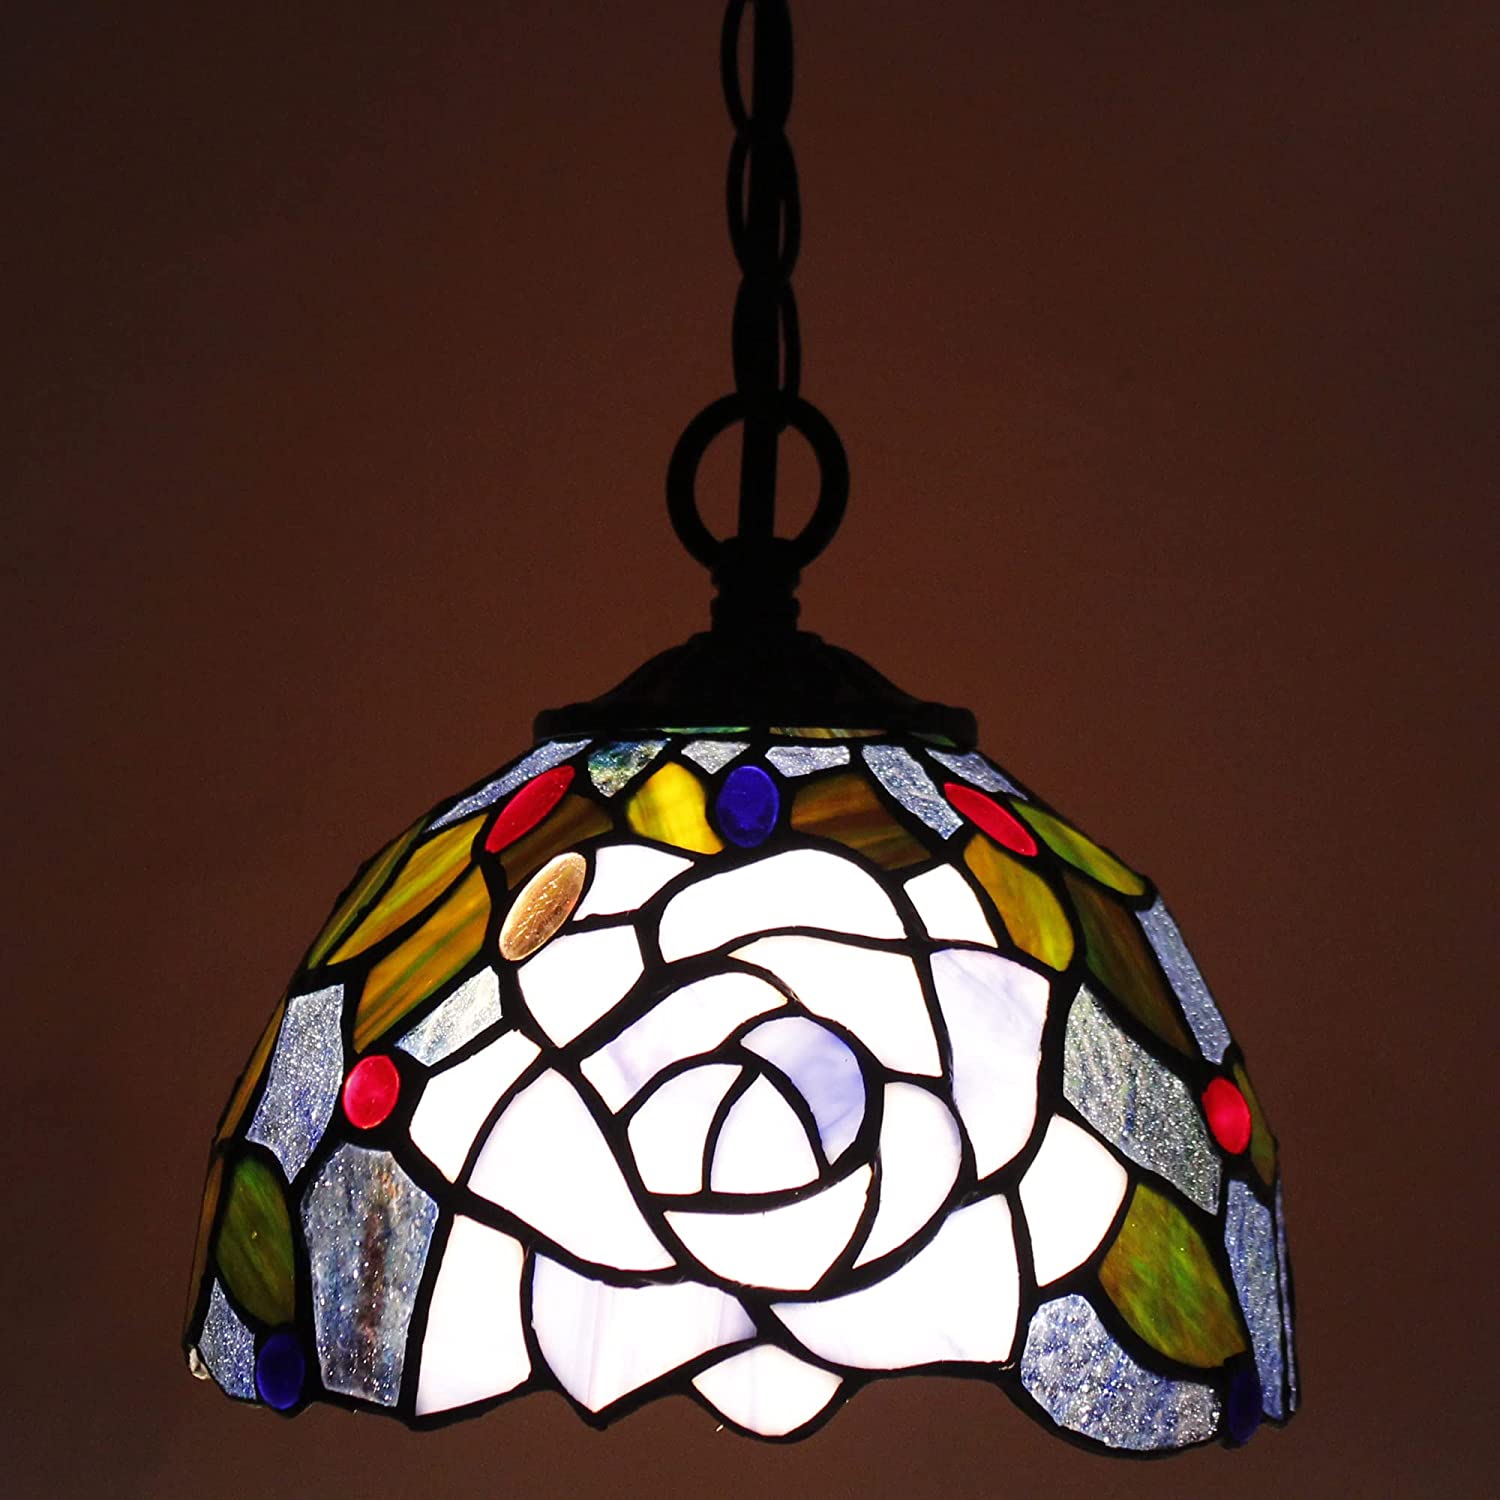 Werfactory Tiffany Pendant Light with W8H7 Inch Stained Glass Rose Shade Hanging Lamp